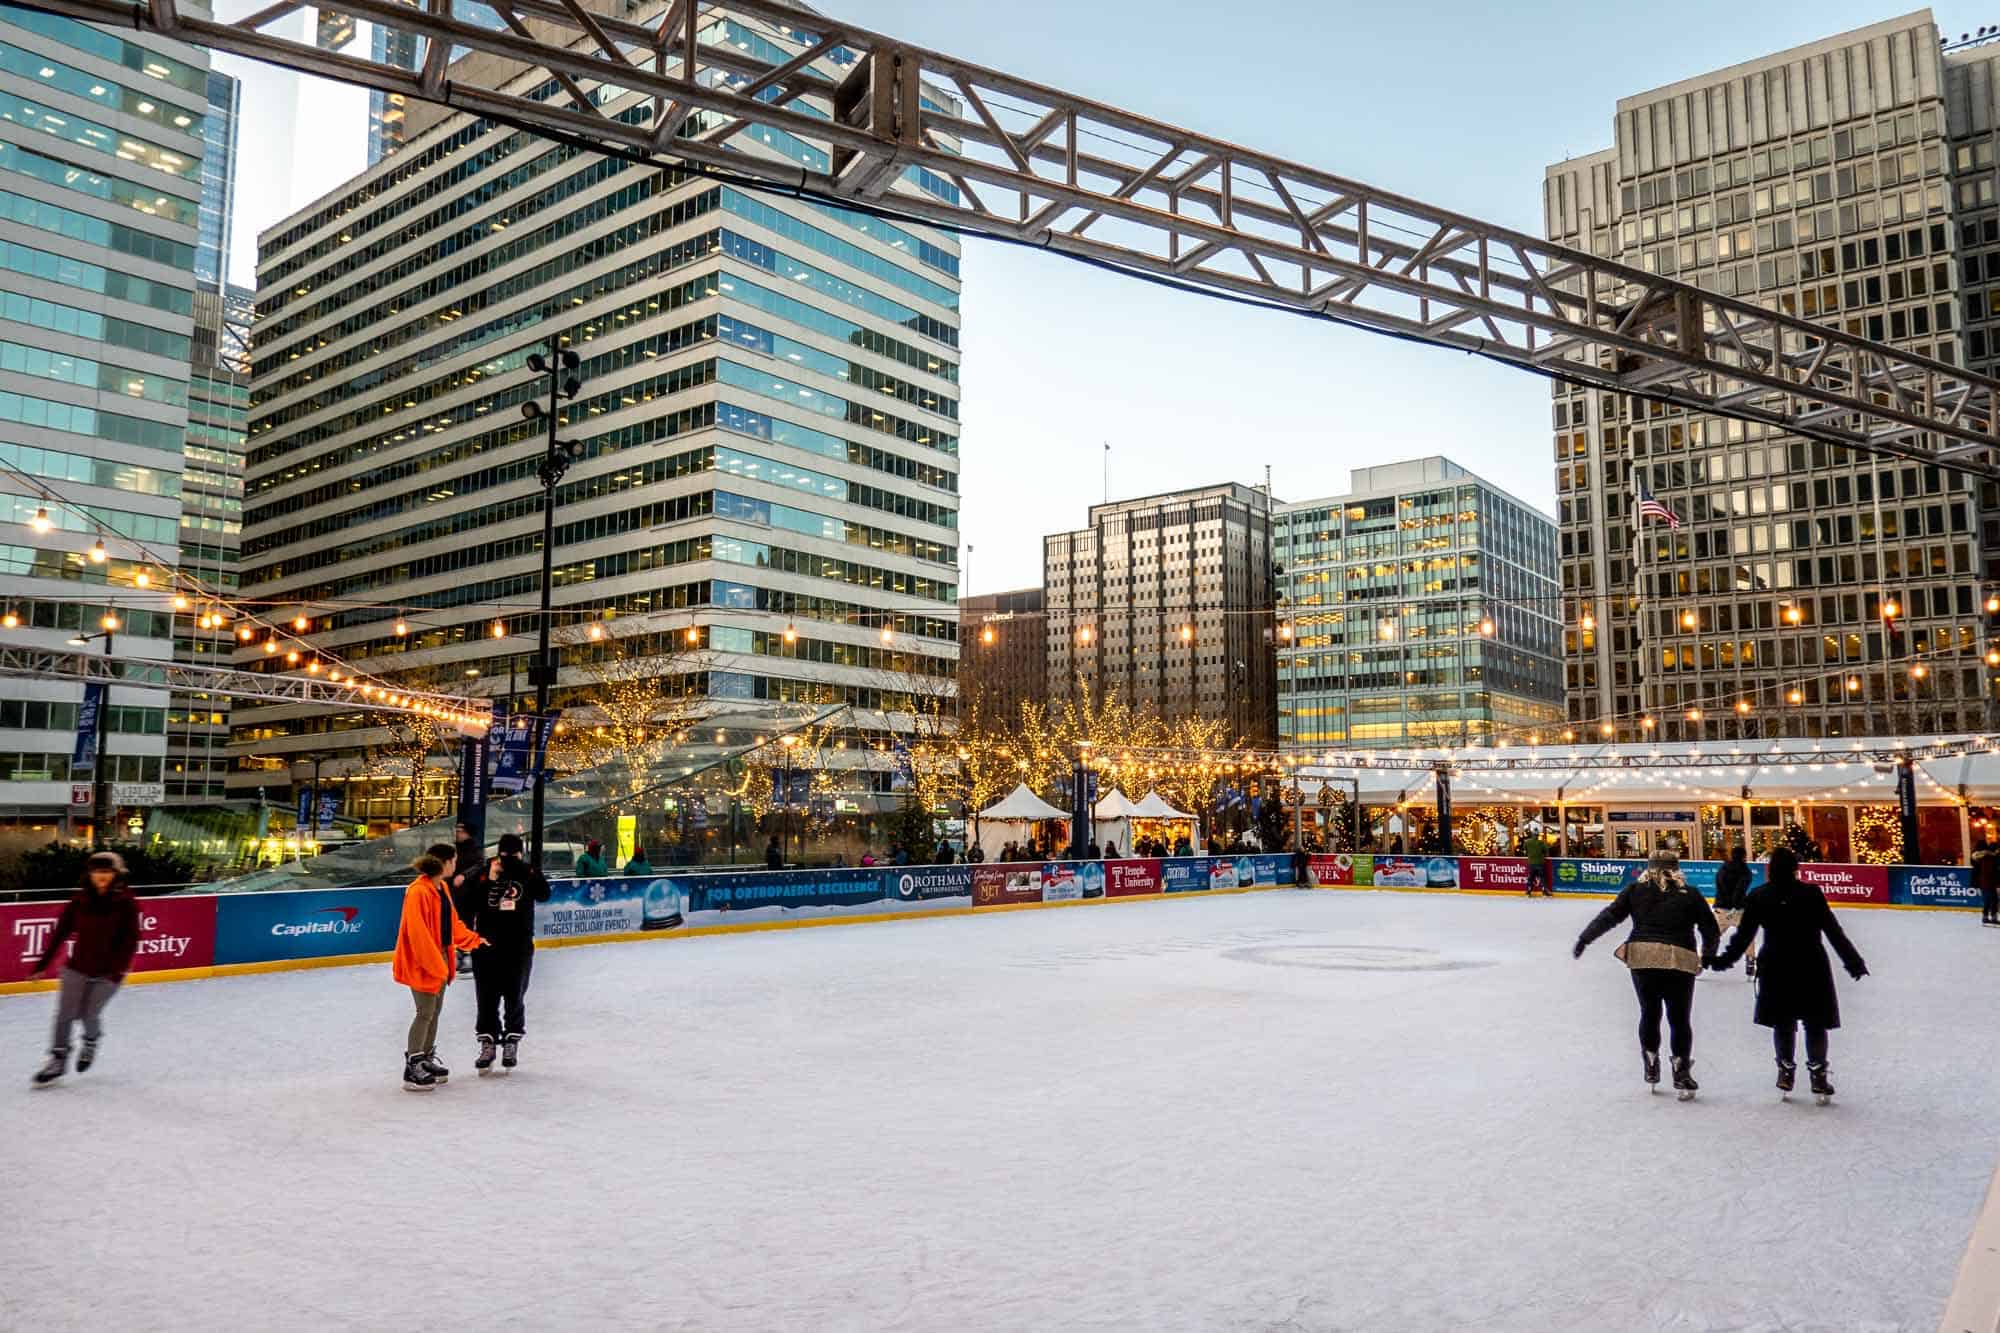 People on an ice-skating rink surrounded by high-rise buildings